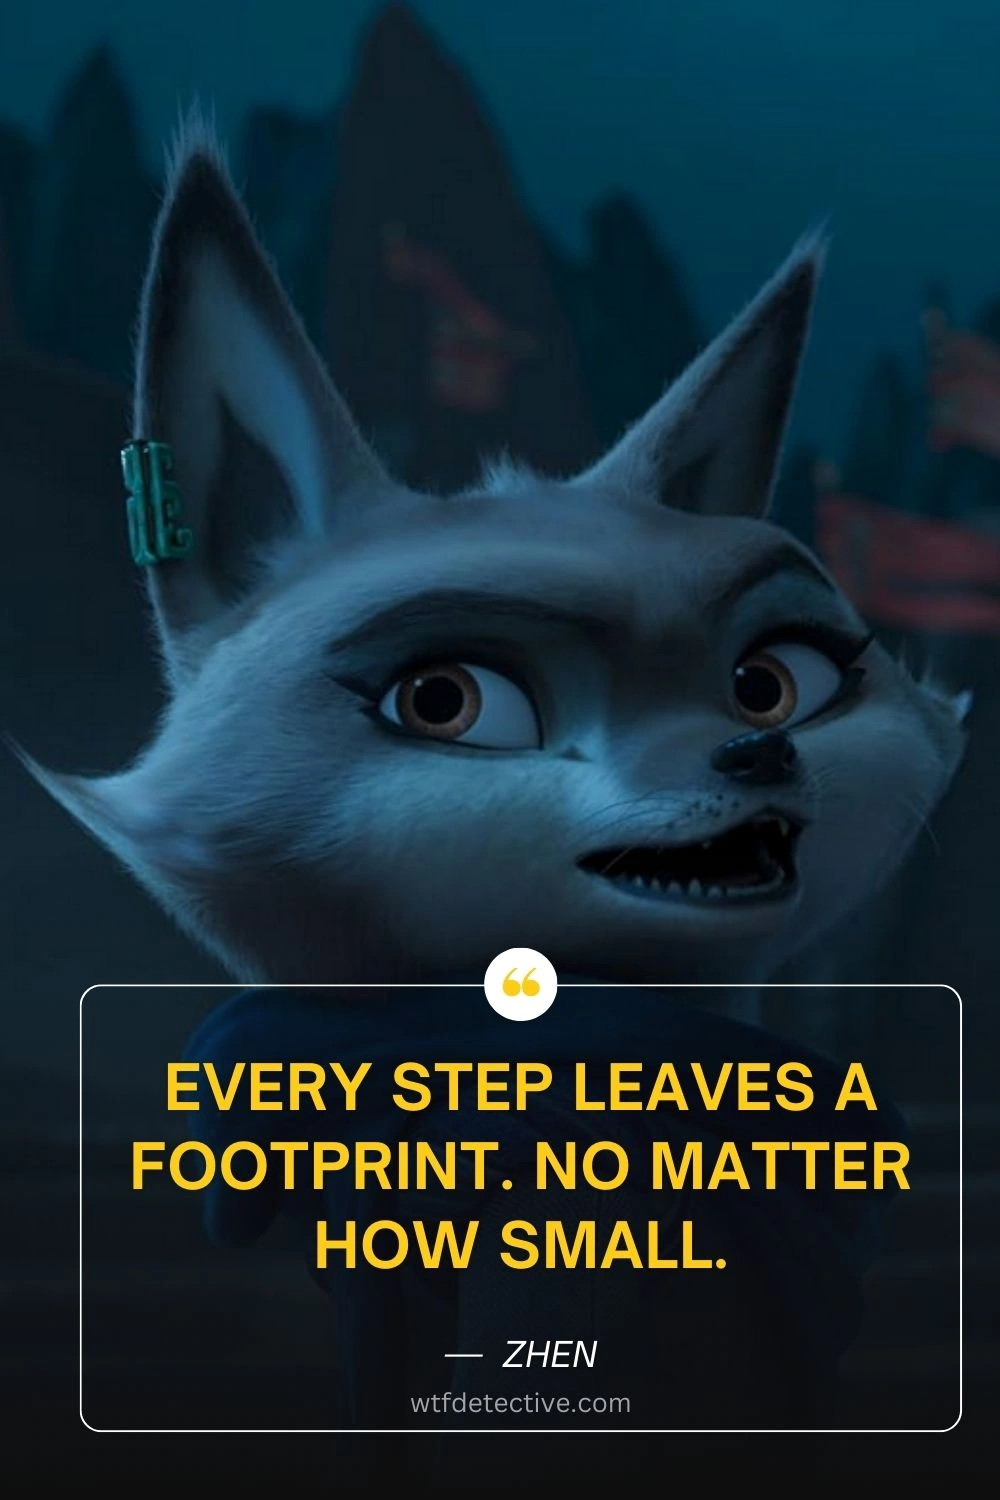 Awkwafina in Kung Fu Panda 4 (2024), zhen quotes, "Every step leaves a footprint. No matter how small." - Zhen